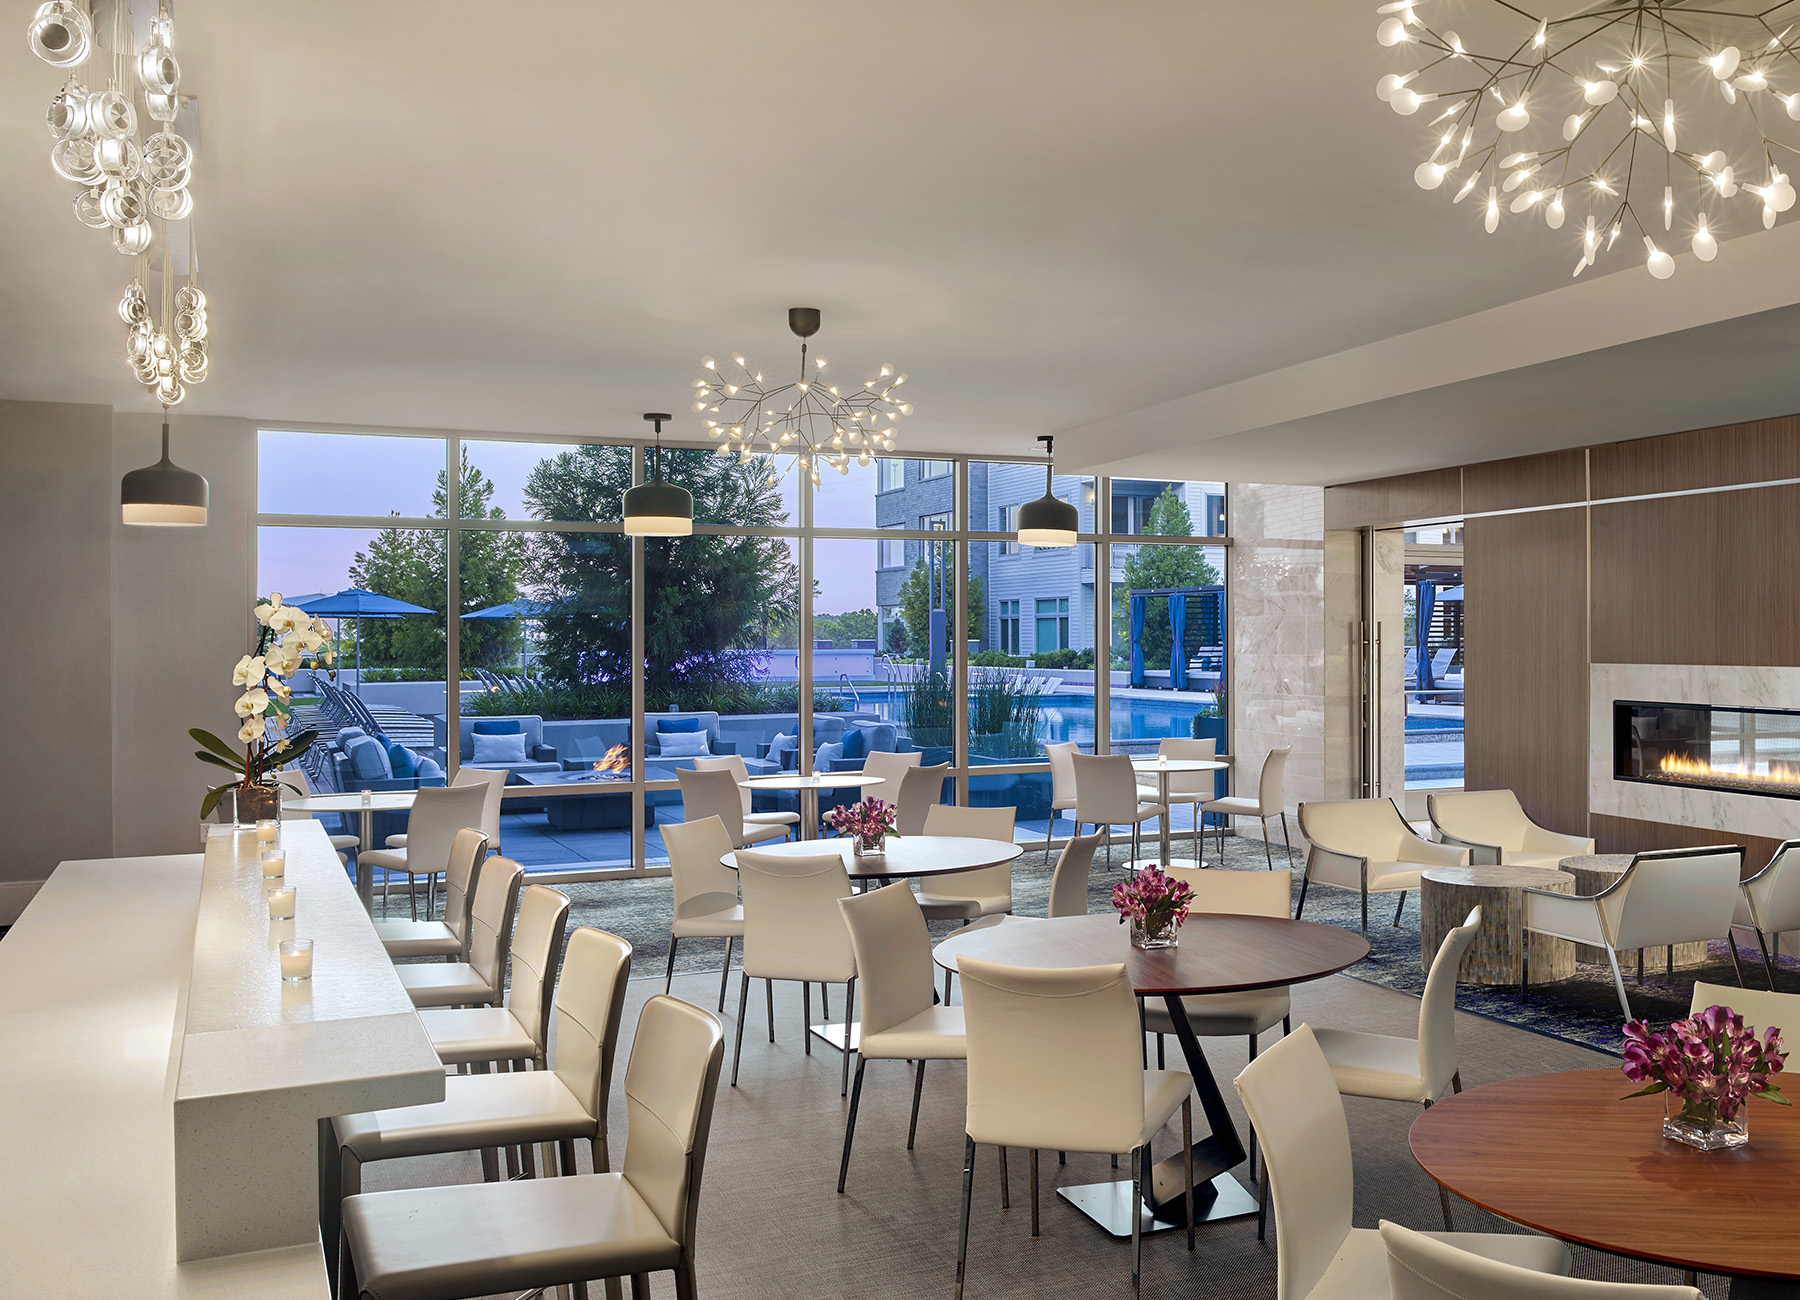 AVE Florham Park Cafe with seating options and fireplace